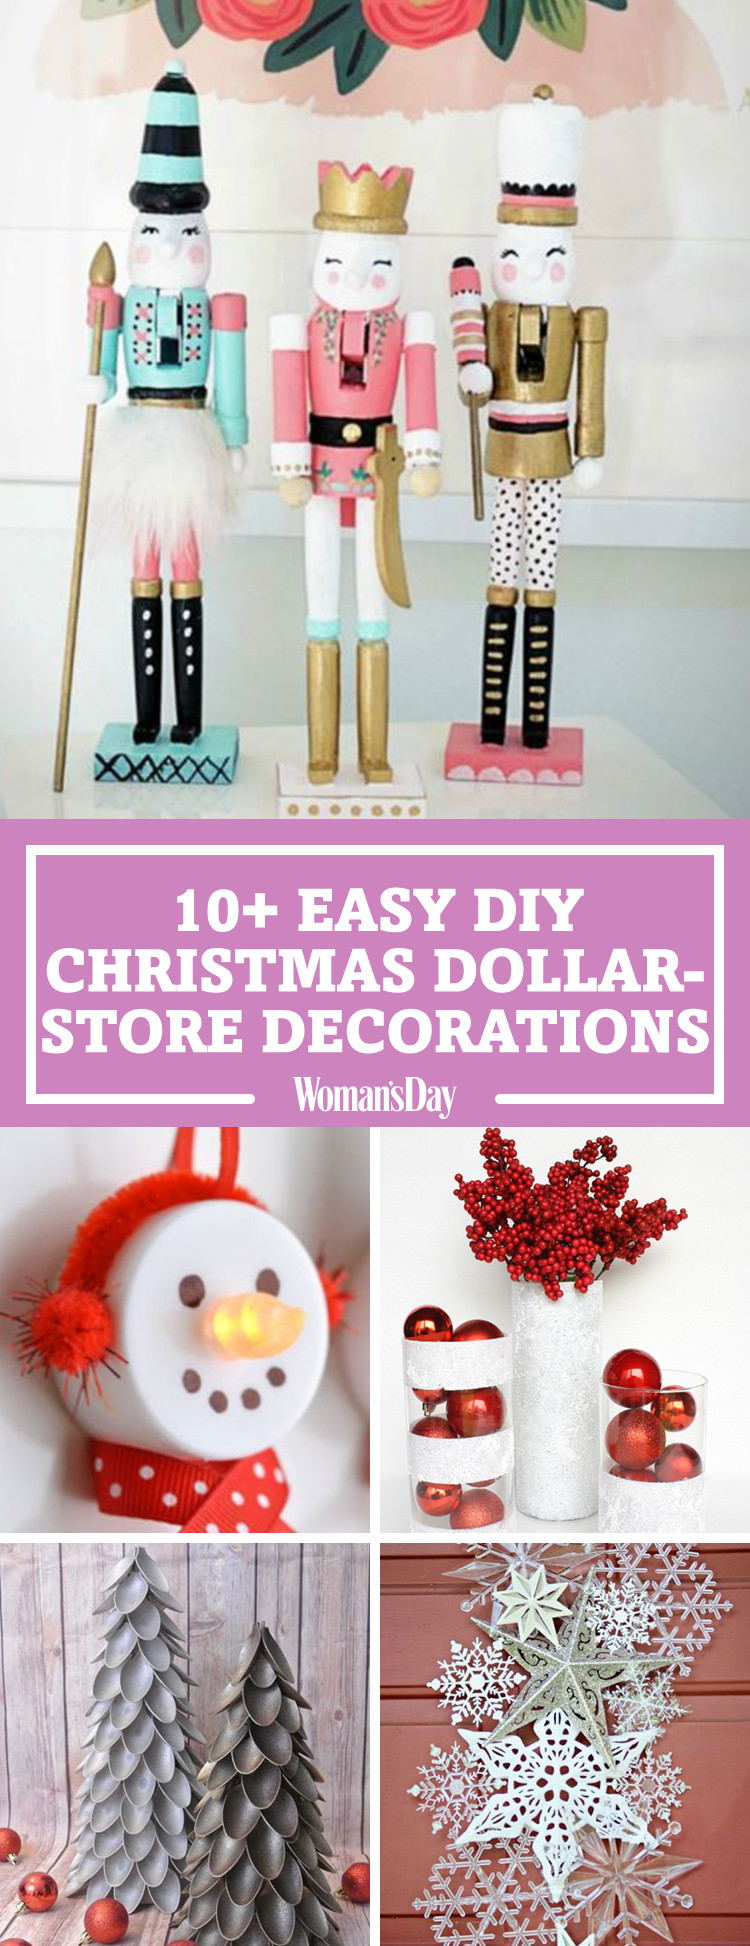 Dollar Store Christmas Craft
 Dollar Store Christmas Decorations Christmas Decor from